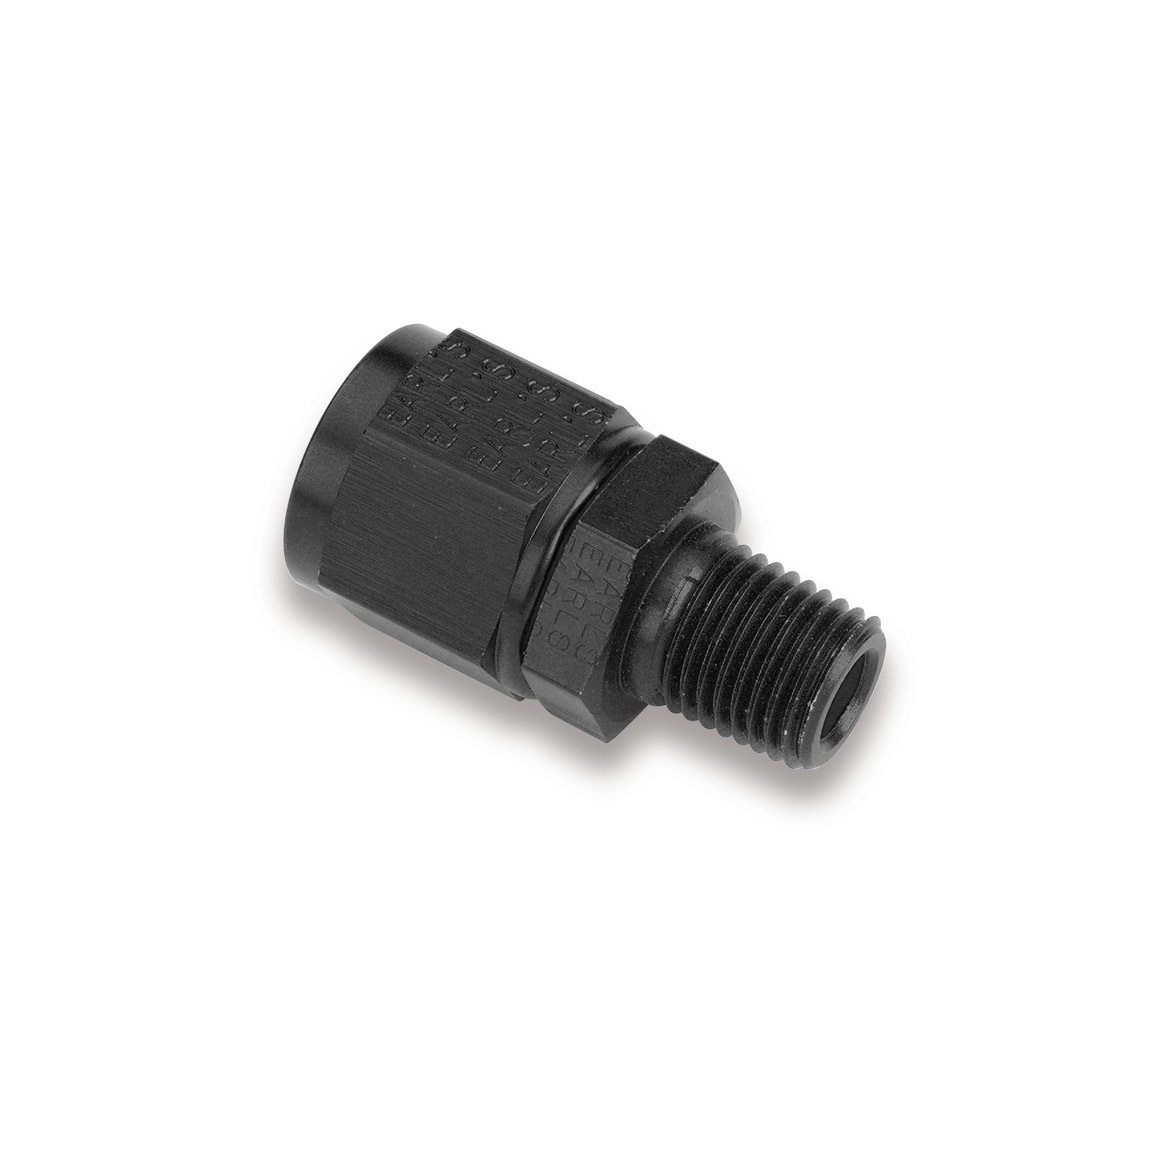 Earls AT916162ERL Fitting, Adapter, Straight, 6 AN Female Swivel to 1/8 in NPT Male, Aluminum, Black Anodized, Each